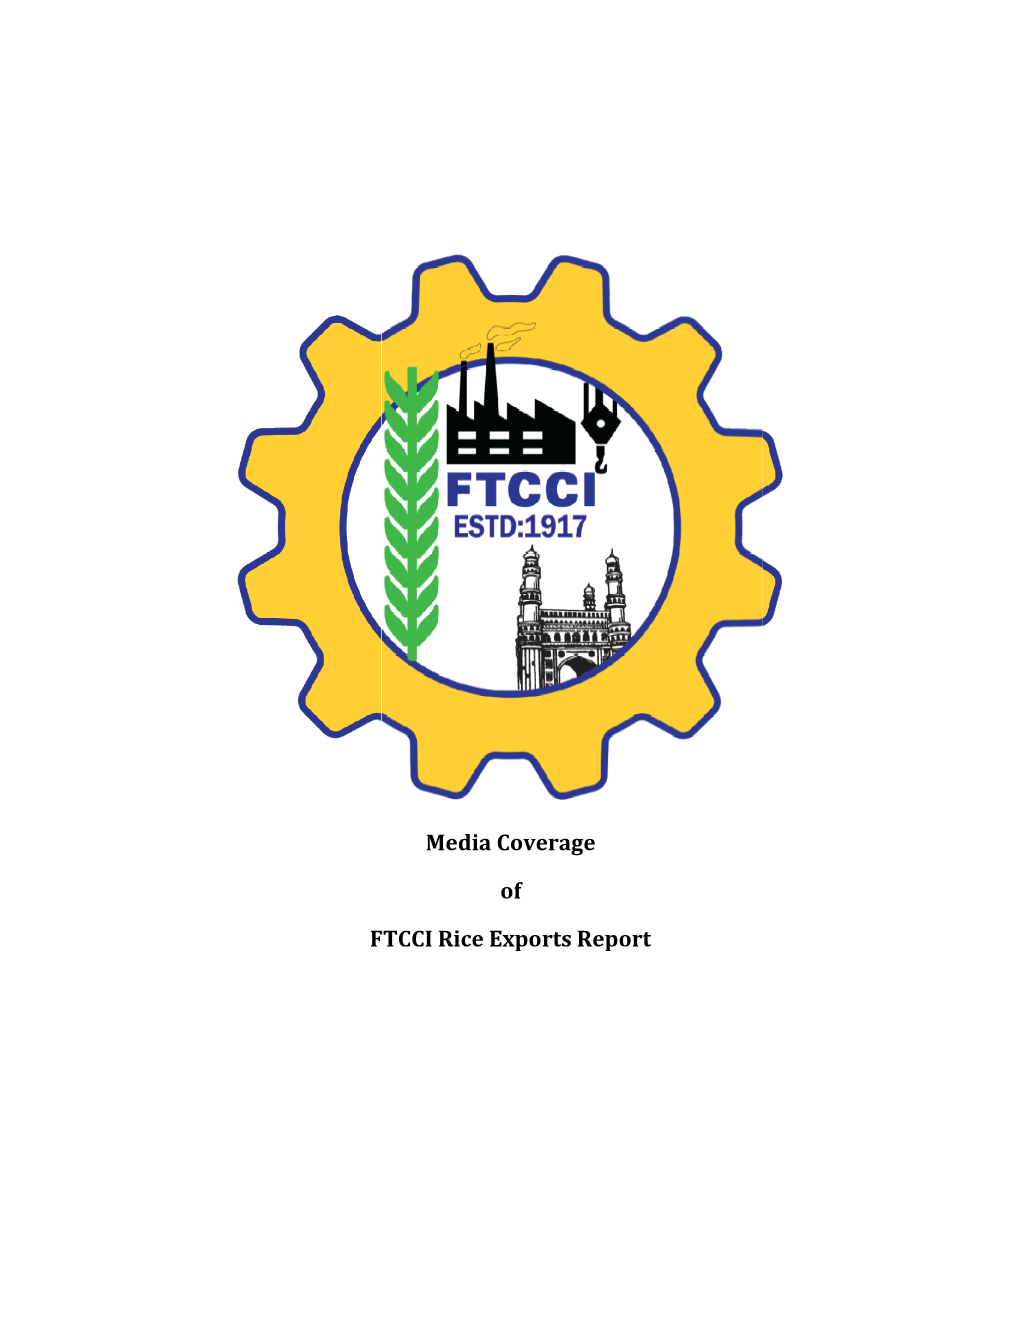 FTCCI Rice E Media Coverage of FTCCI Rice Exports Report